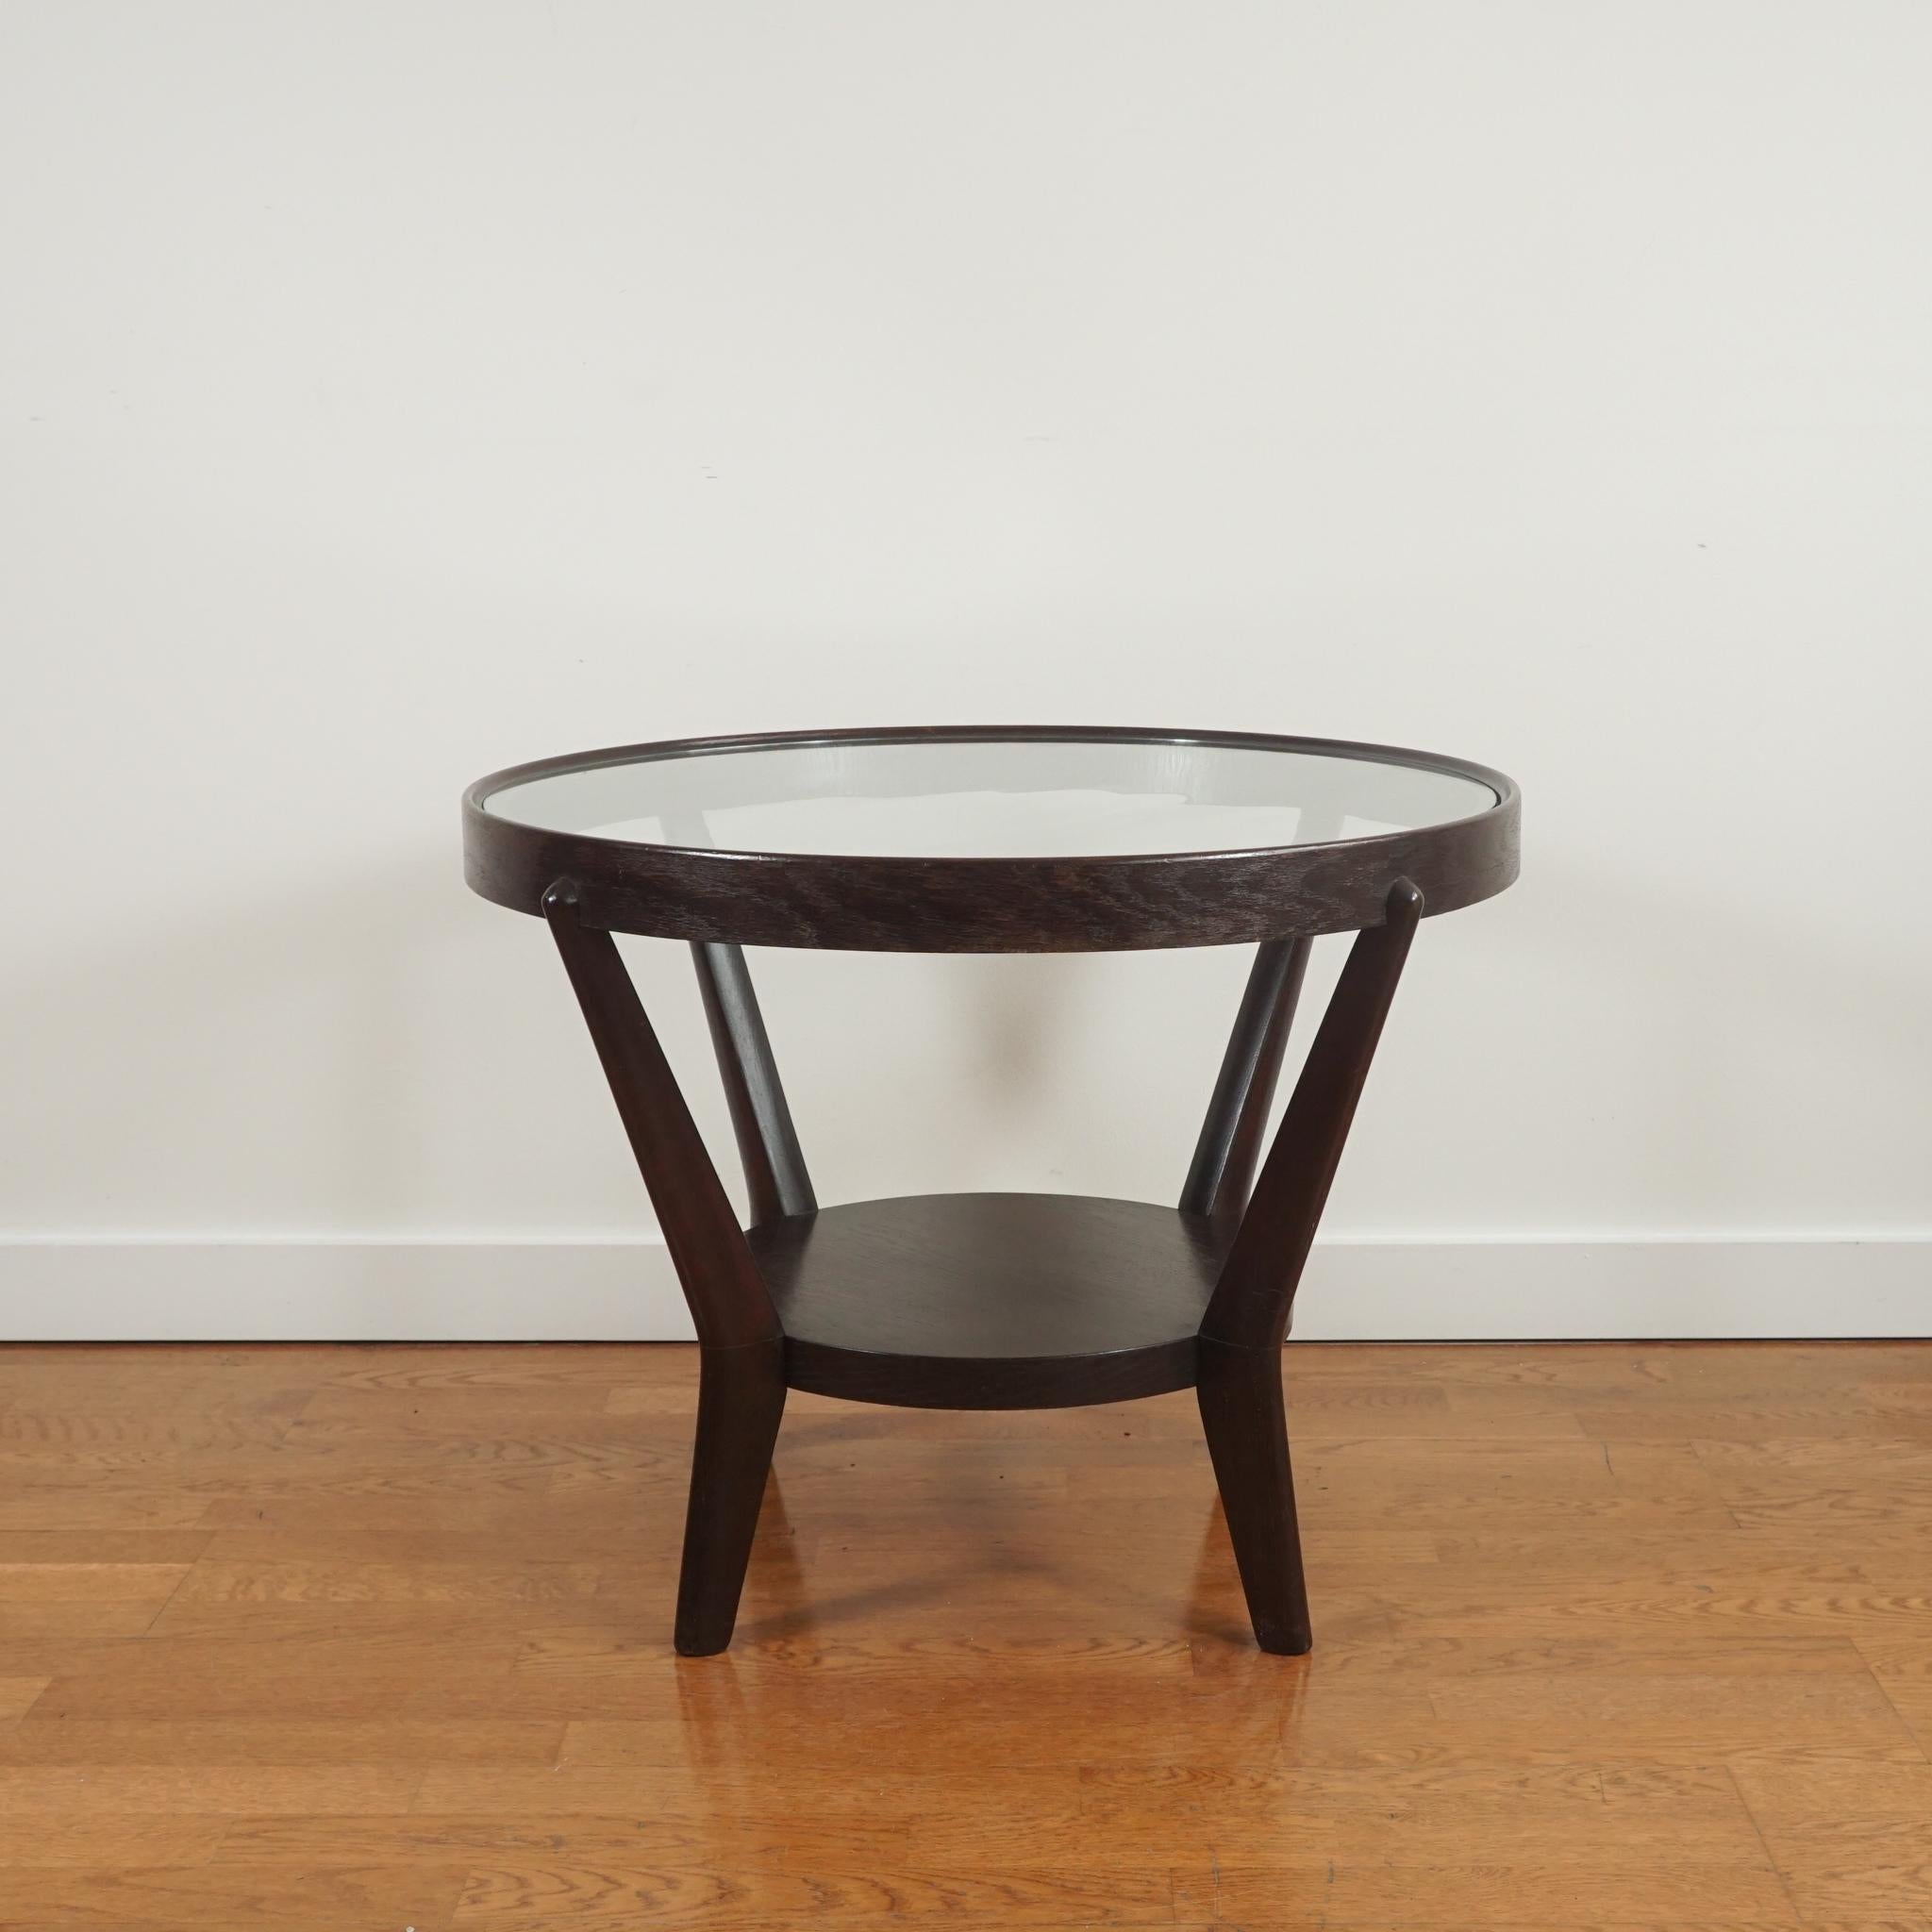 The round glass top wood side table, shown here, defies its age. Made in the 1950s, it has been gently restored to enhance the original black patinated finish. The glass top with bottom shelf makes the table appear lighter and perfectly suited for